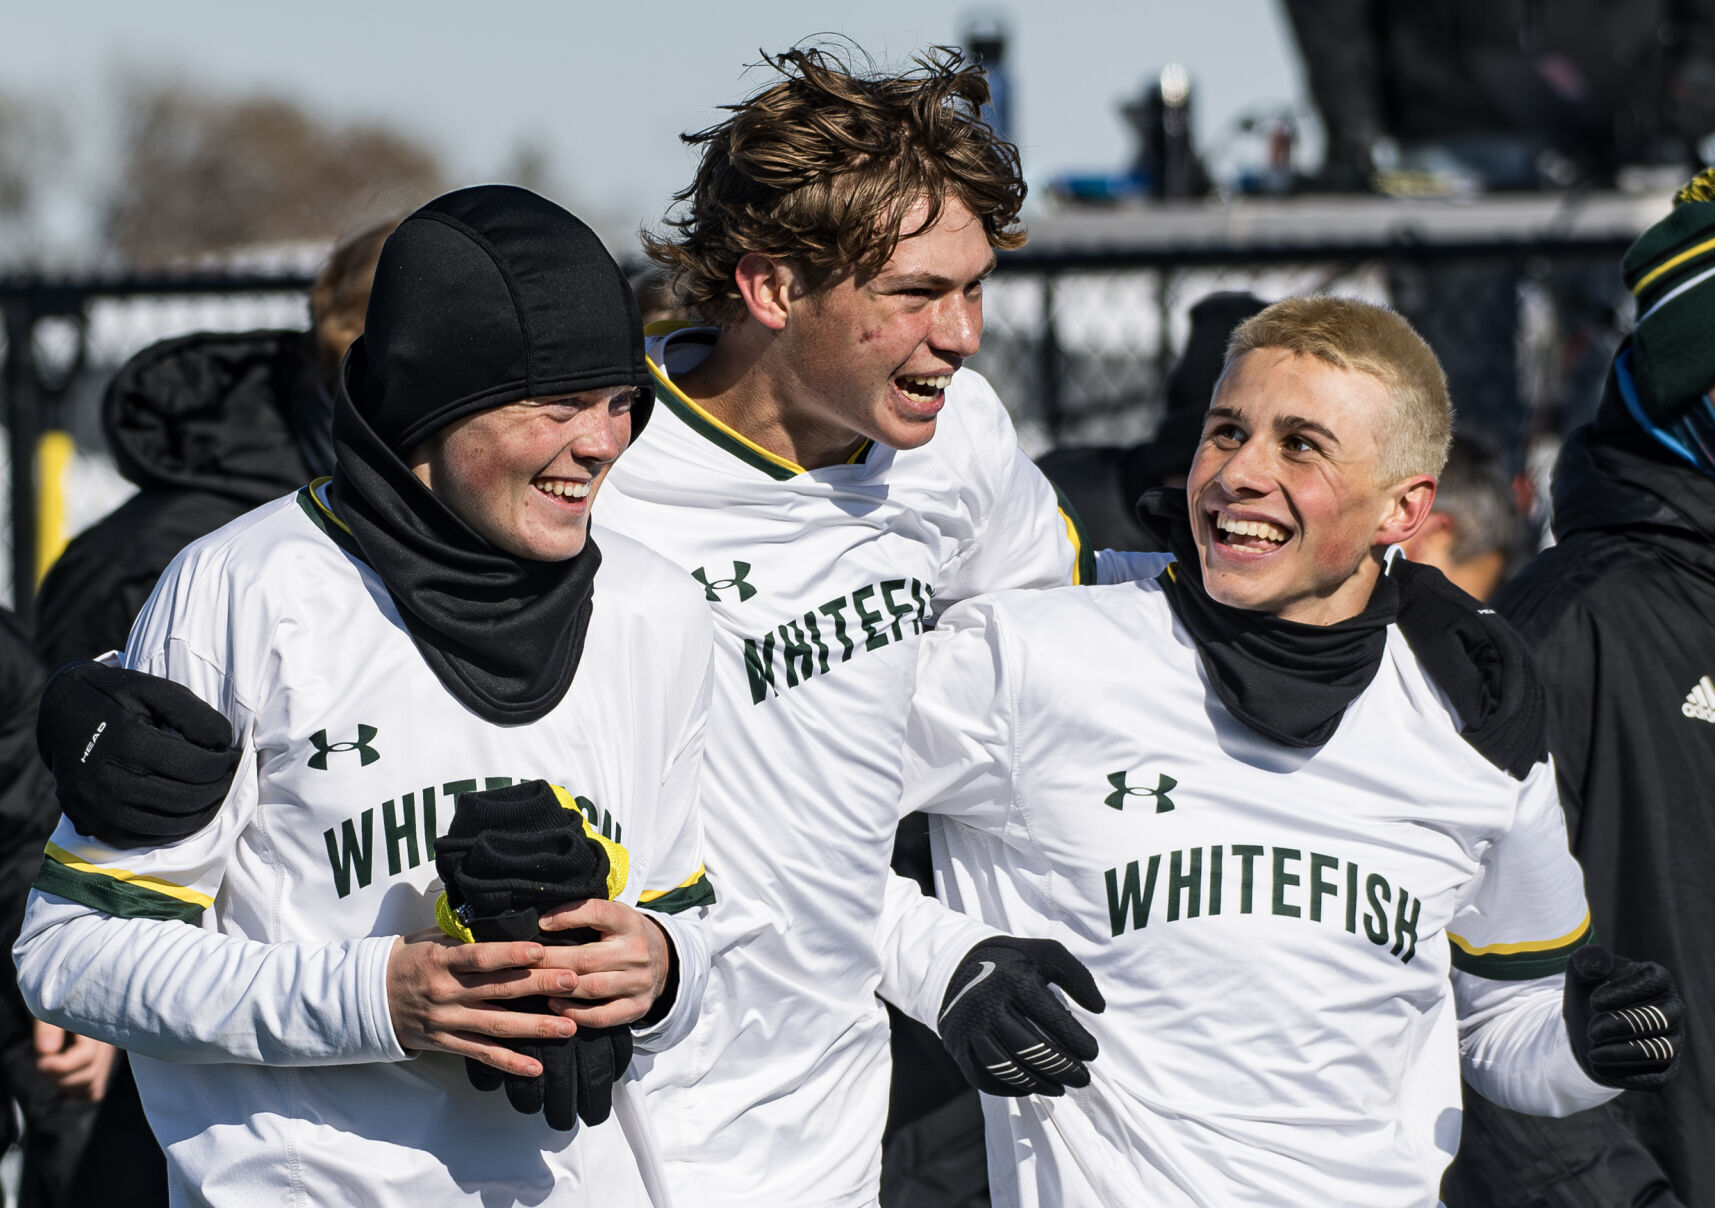 Whitefish Boys Soccer Team Wins 10th State Championship with 1-0 Victory